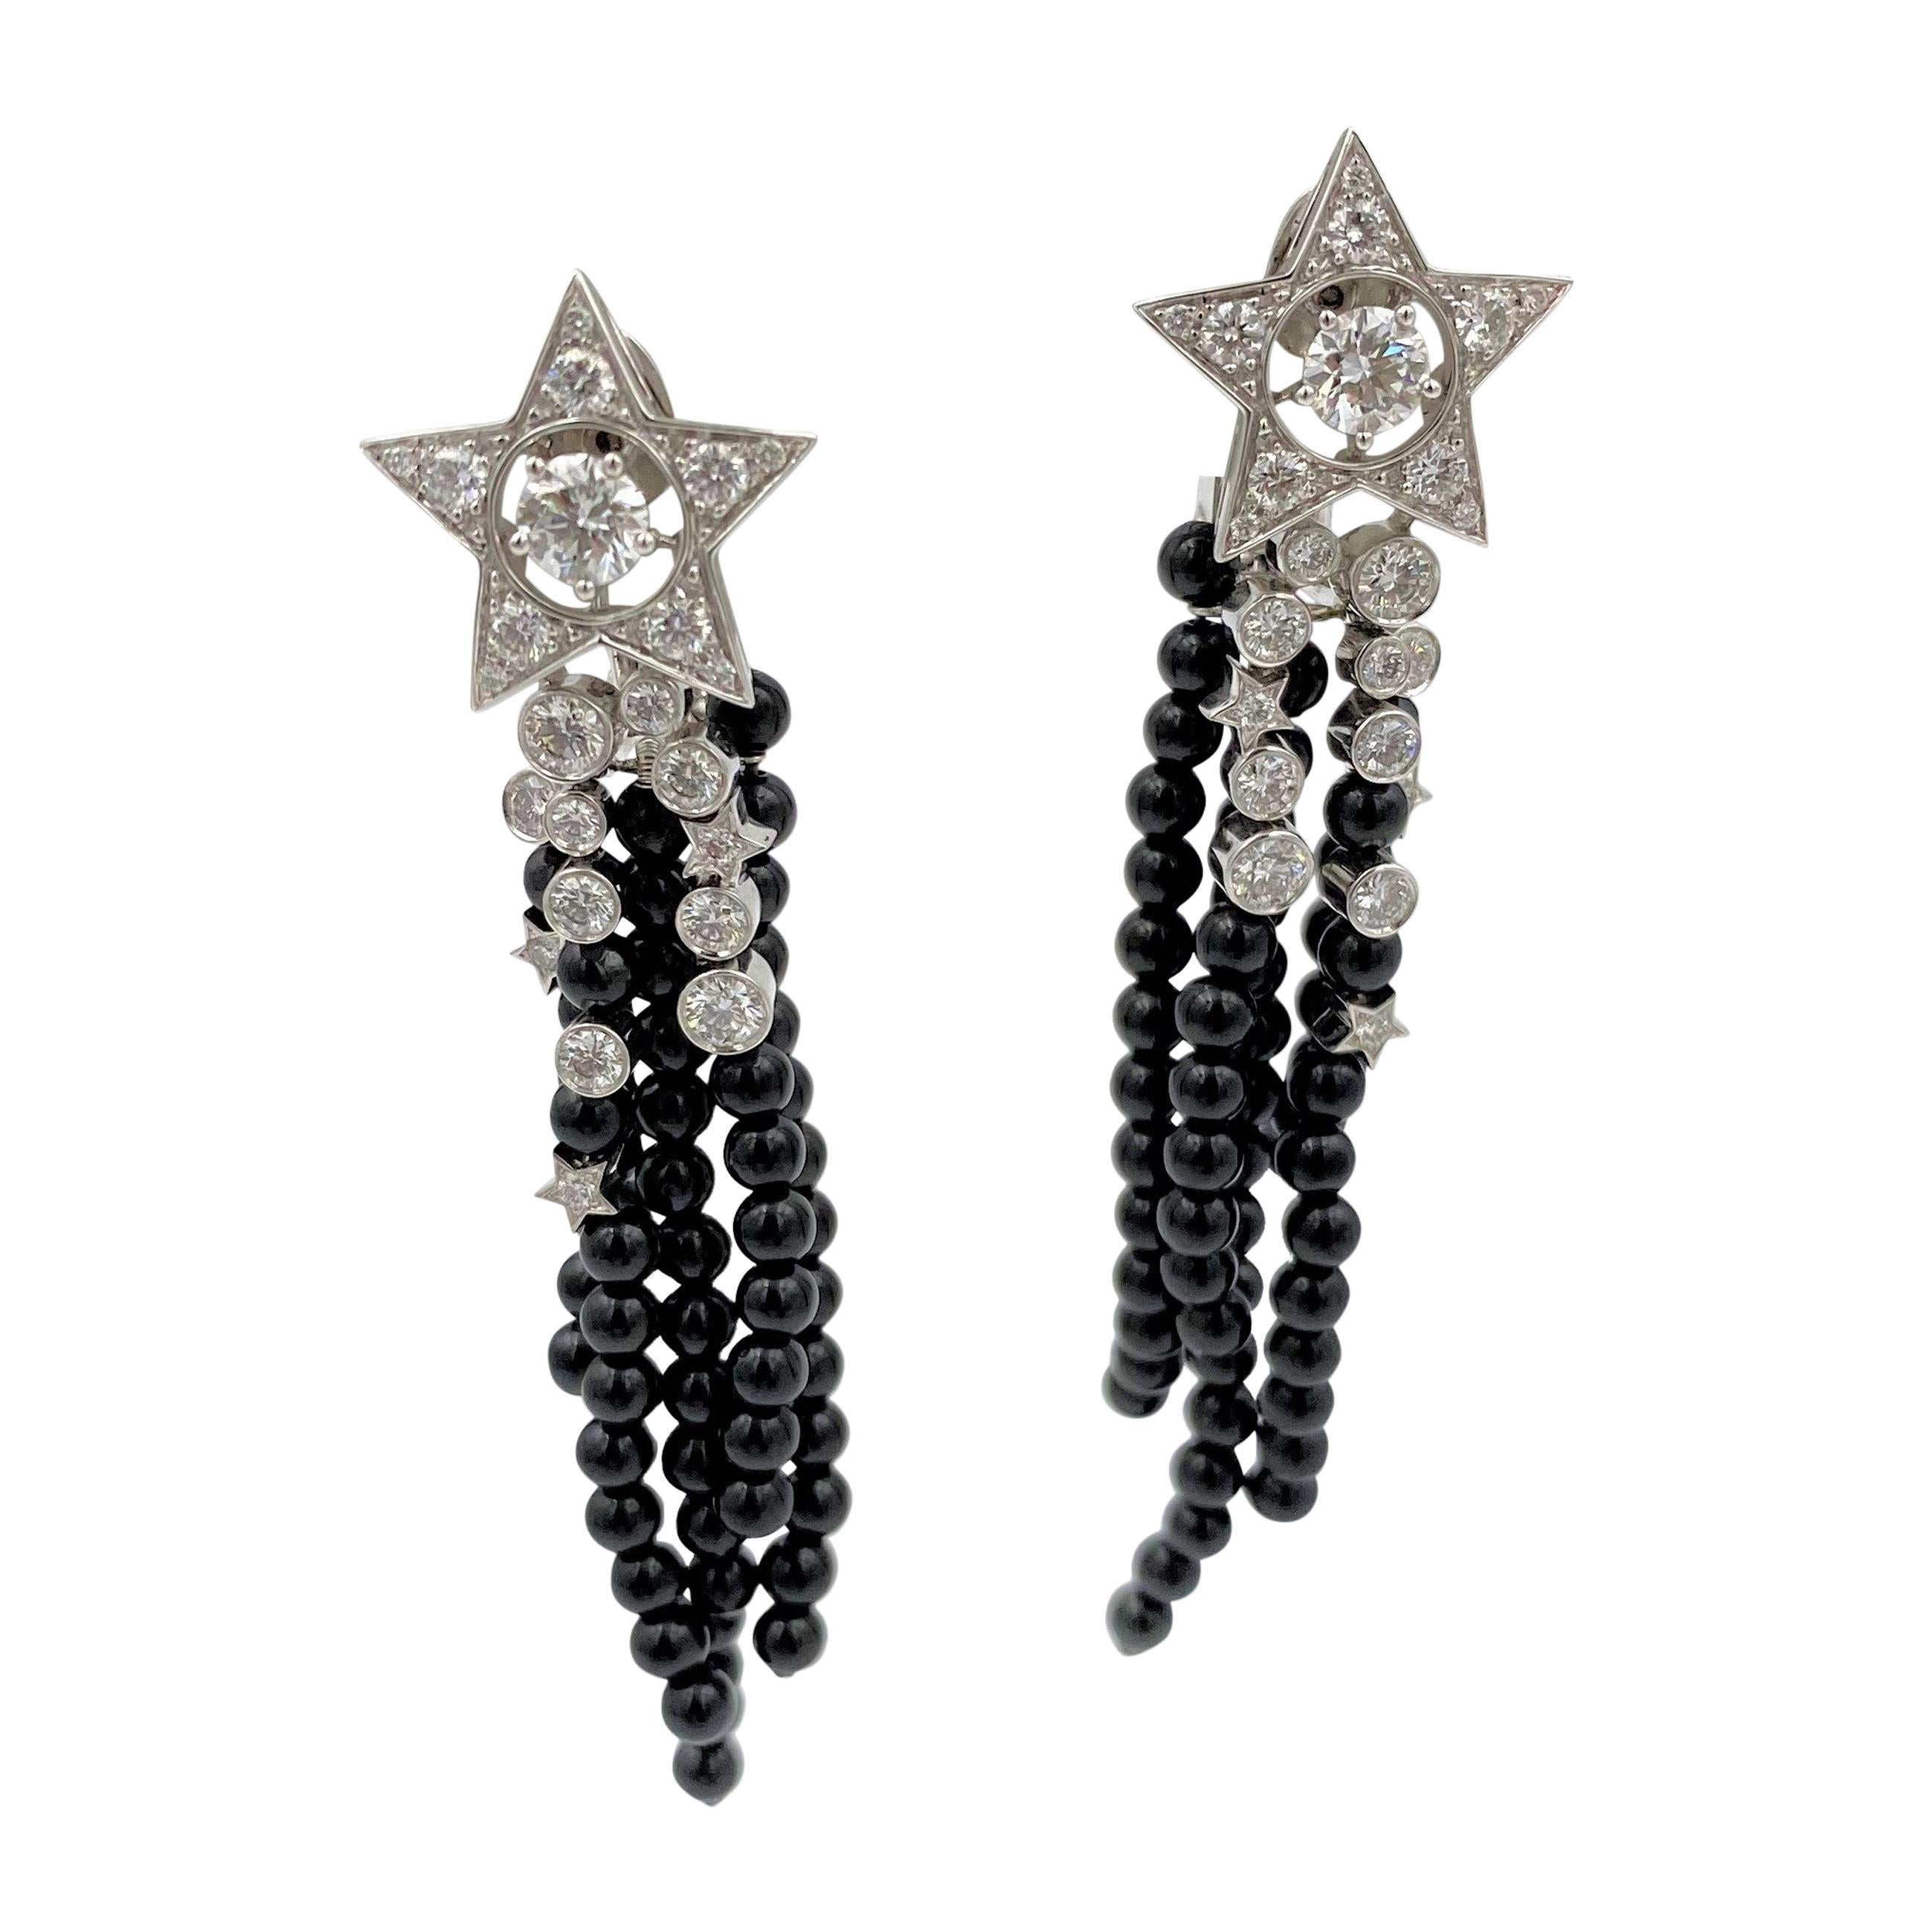 Chanel Comète Diamond and Black Spinel Earrings